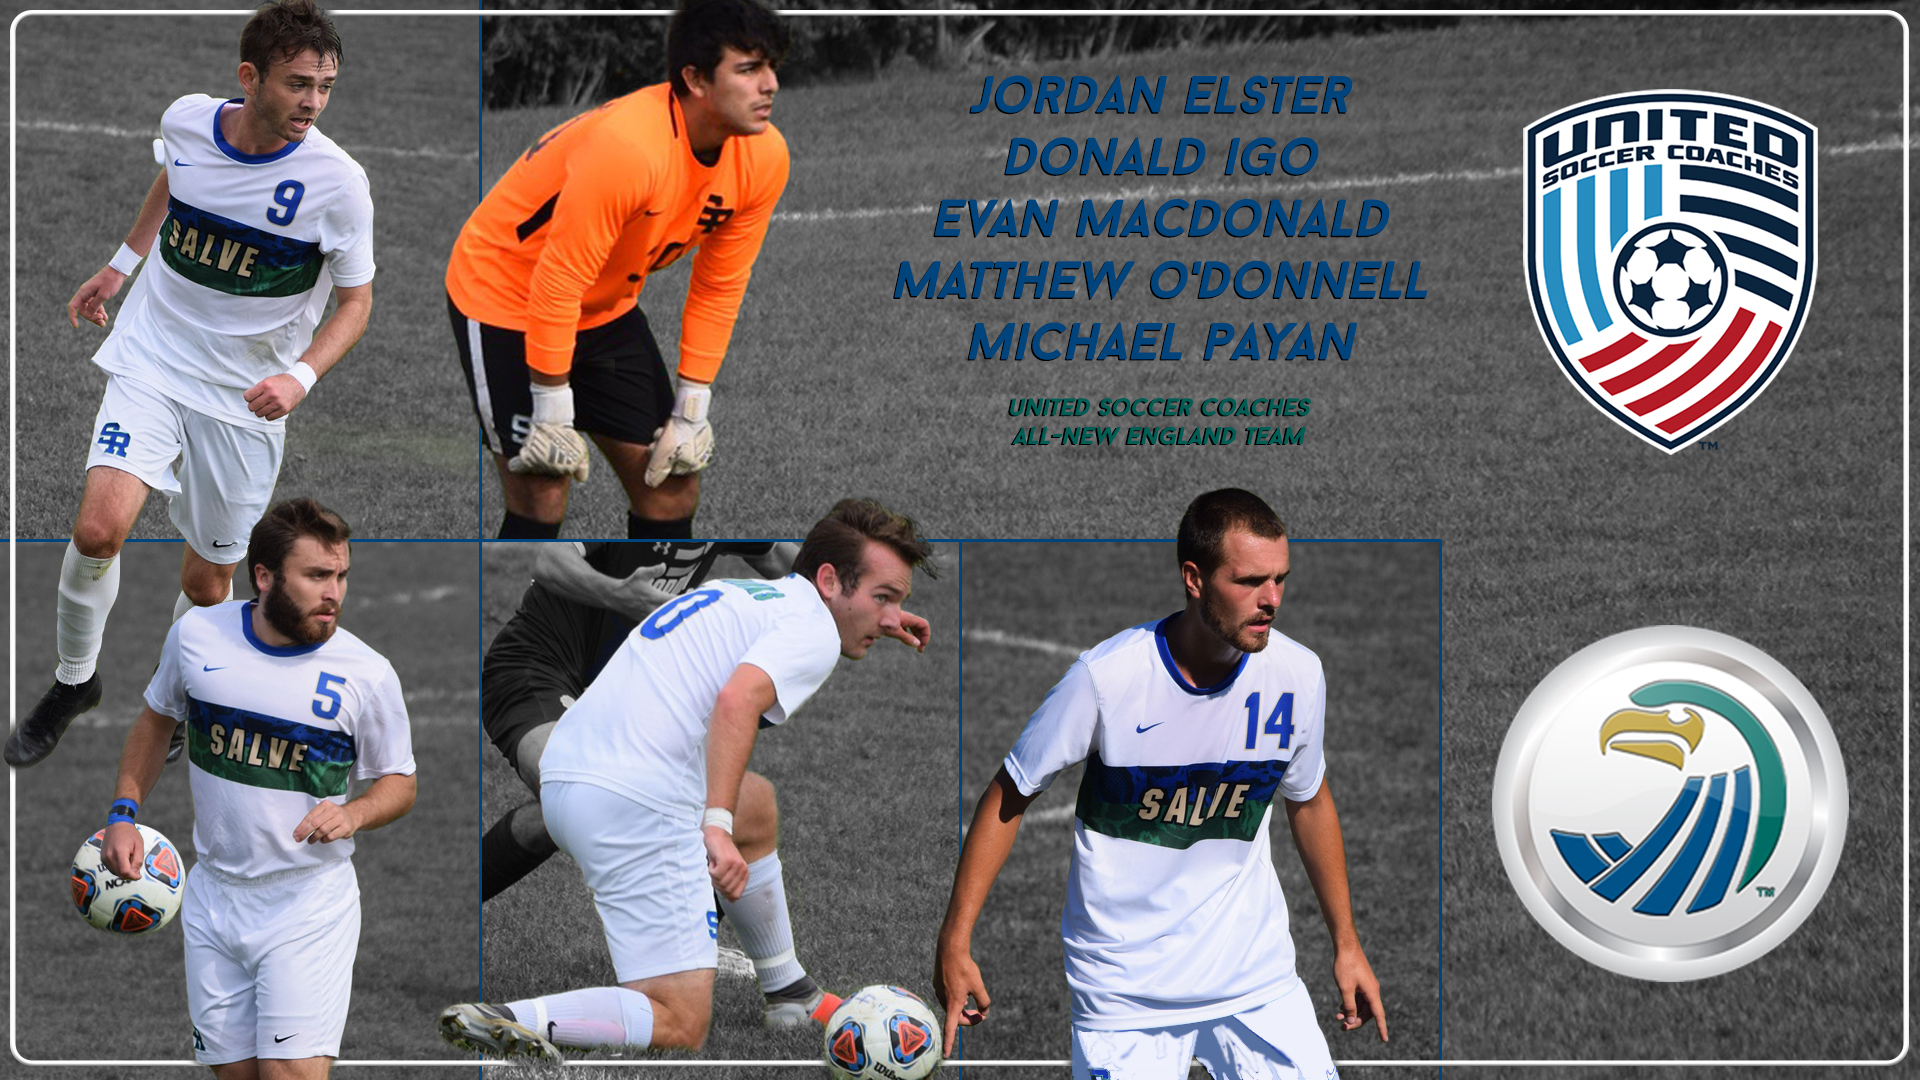 Salve Regina men’s soccer led the entire New England region with a record five (5) selections - both Donald Igo and Matthew O’Donnell were selected to the First Team. Evan MacDonald was selected to the Second Team, while both Jordan Elster and Michael Payan were selected to the Third Team.